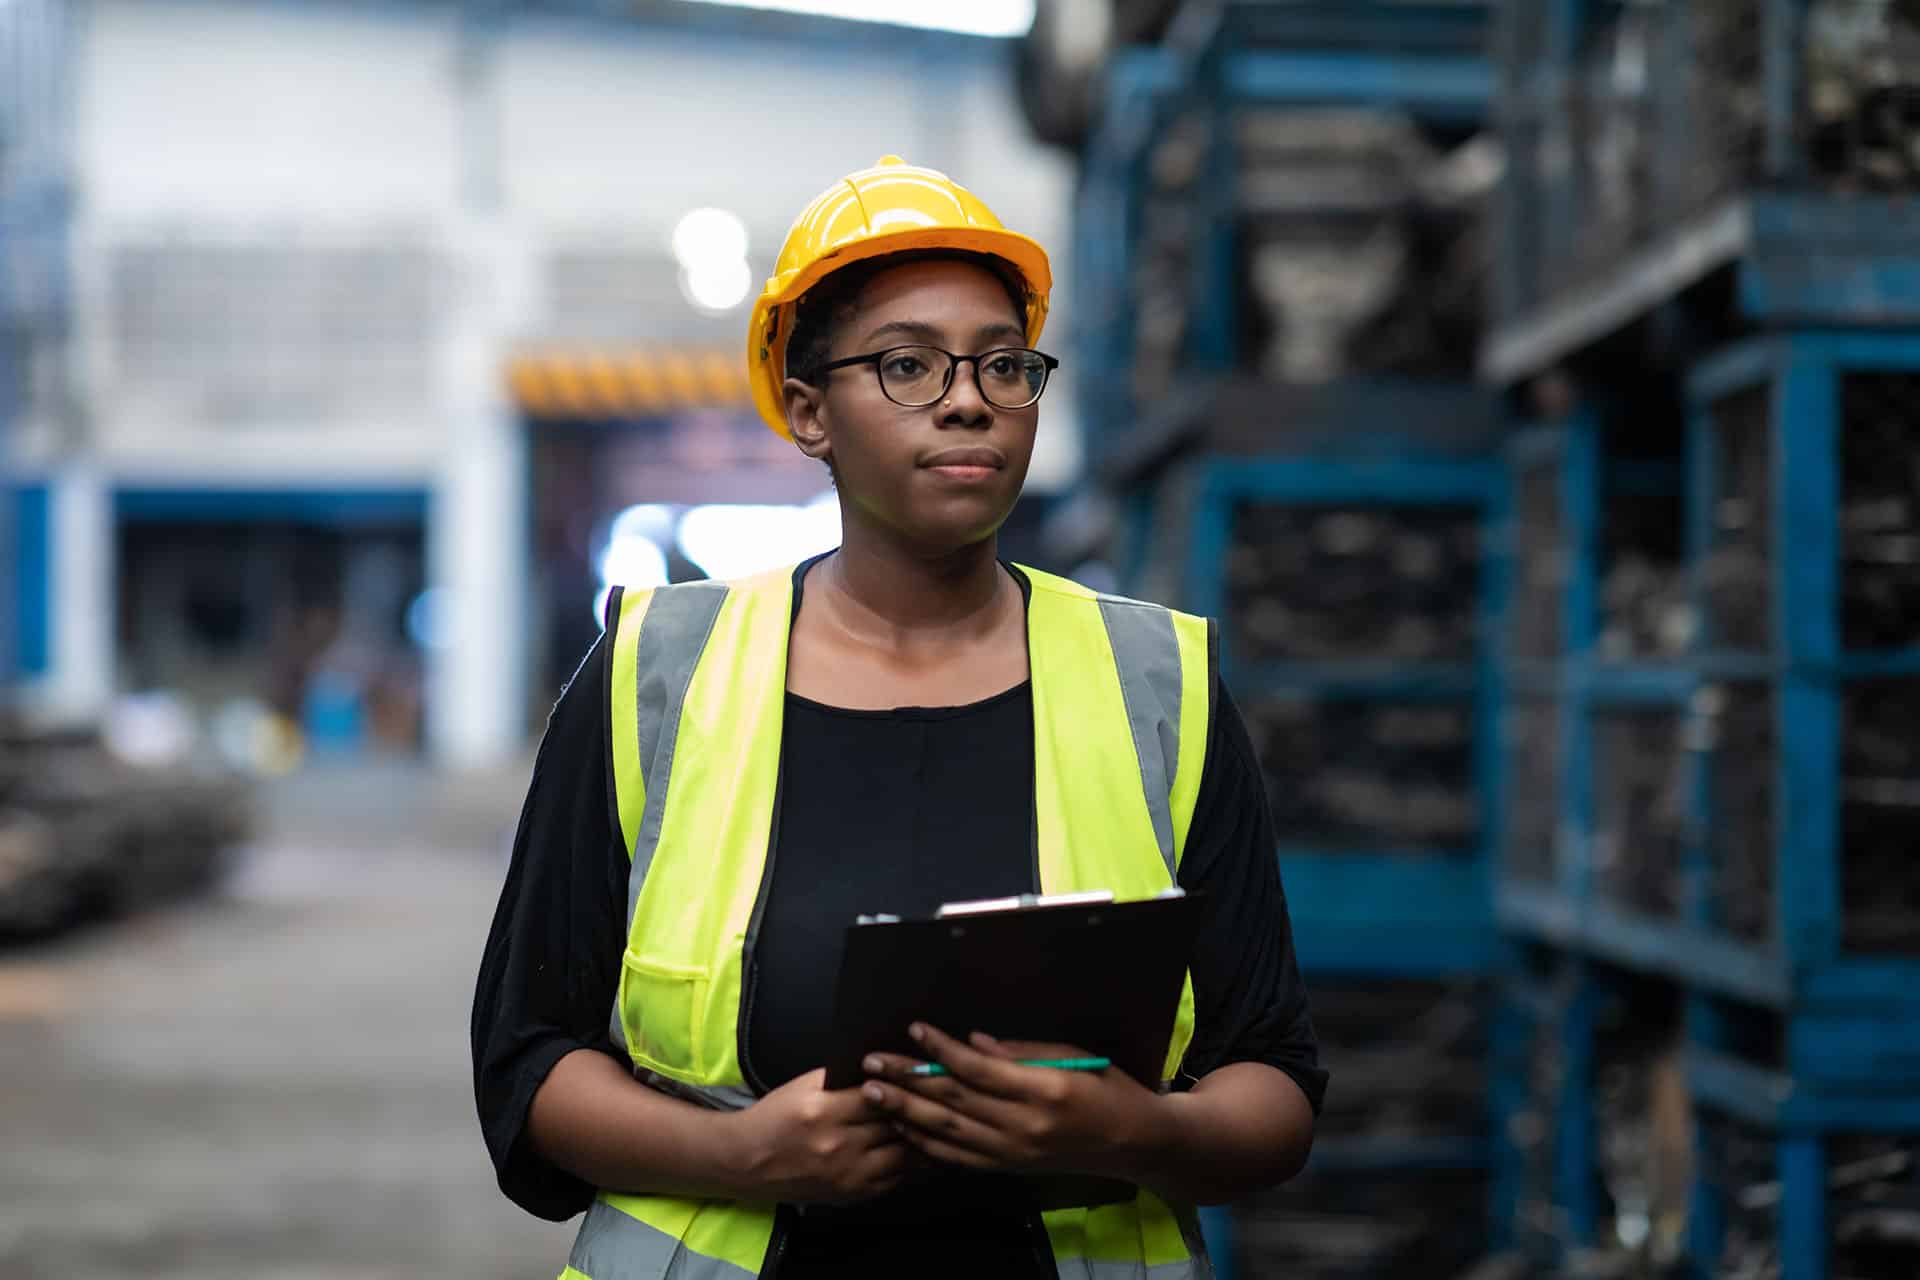 Plus size black female worker wearing safety hard hat helmet inspecting old car parts stock while working in automobile large warehouse